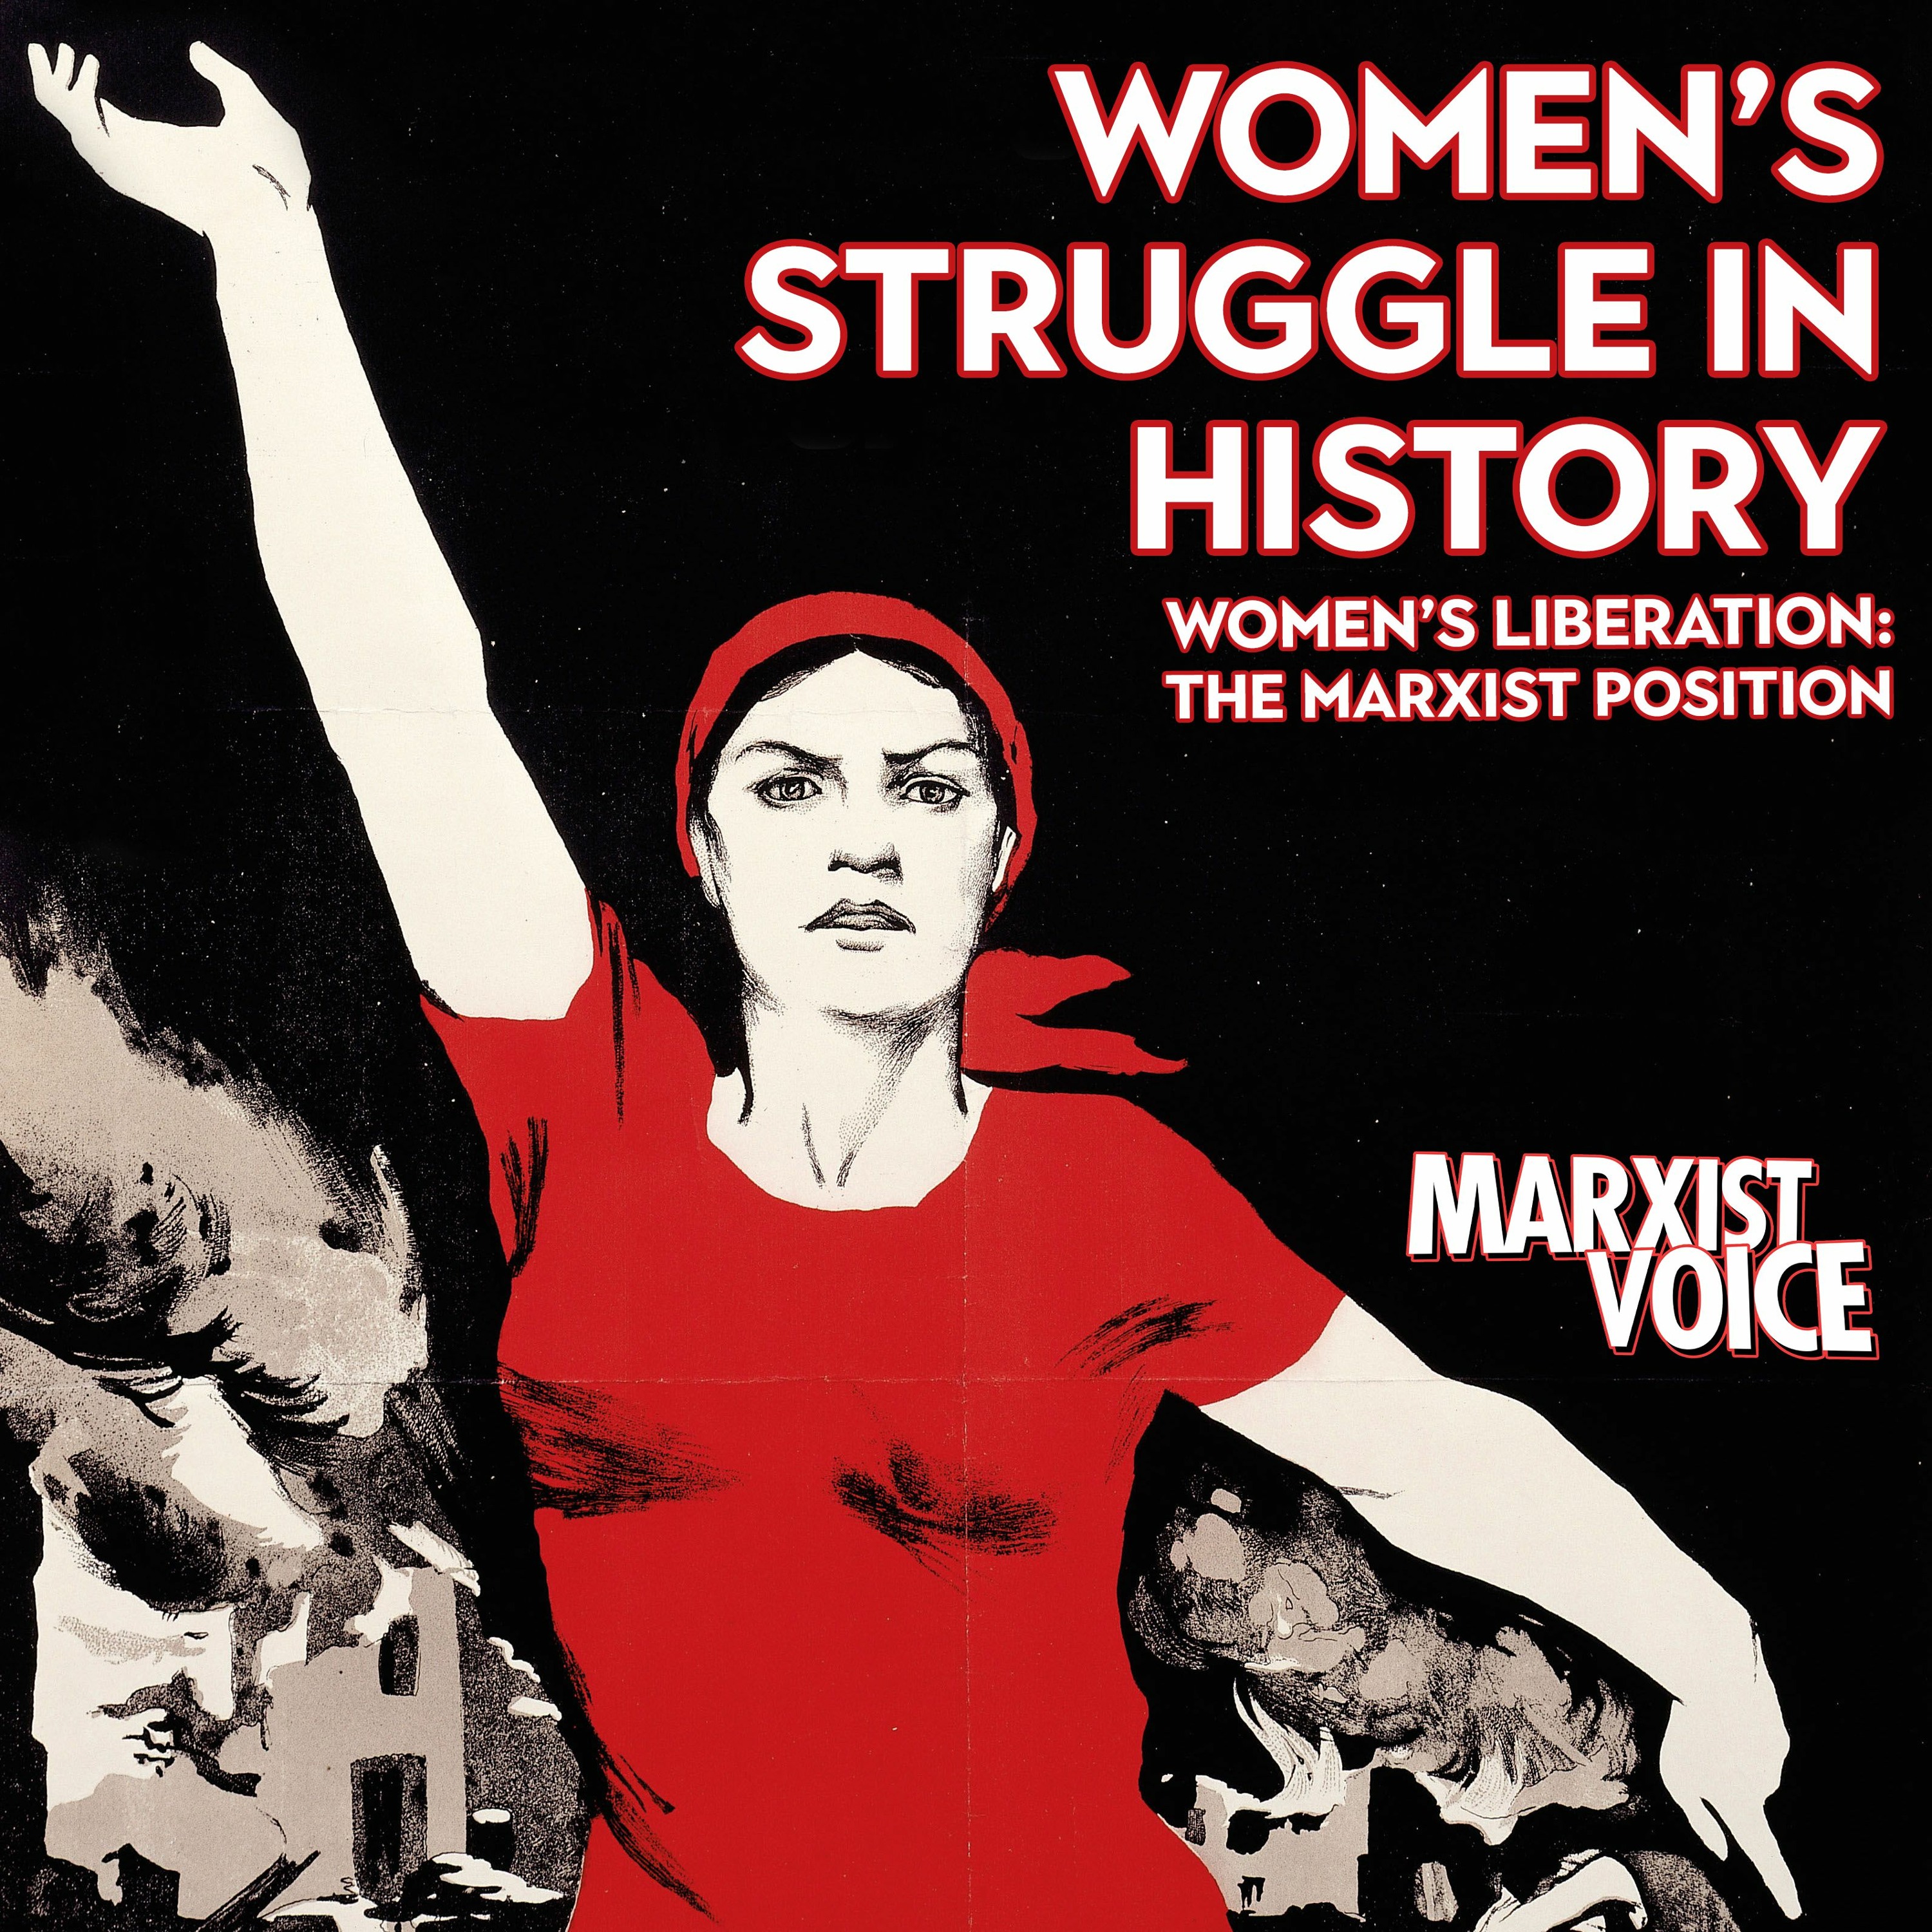 Women's struggle in history | Women's liberation: The Marxist position